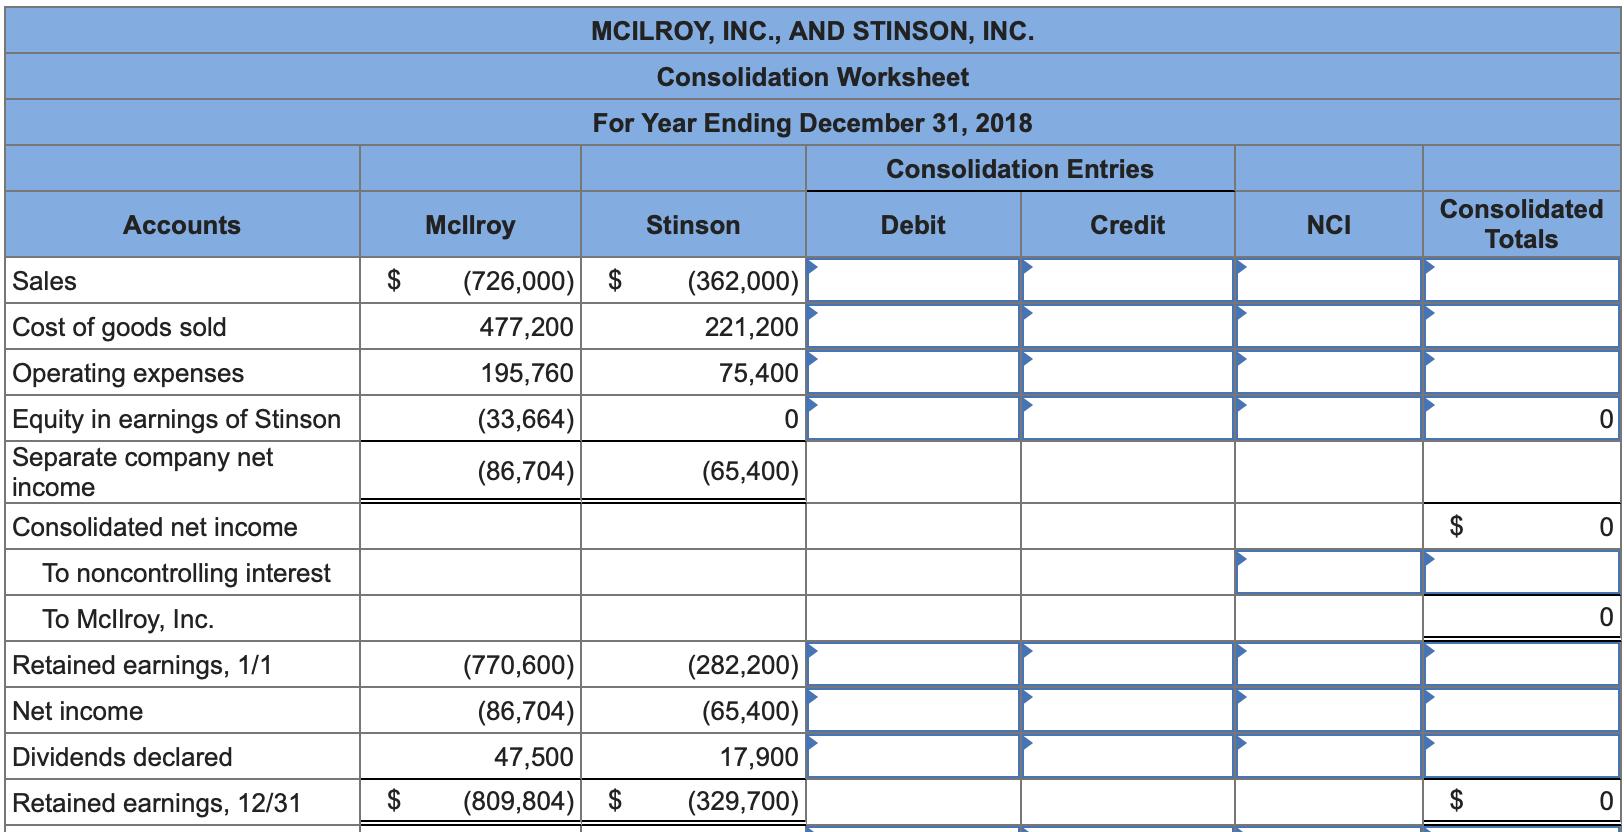 Accounts NCI Consolidated Totals Cor MCILROY, INC., AND STINSON, INC. Consolidation Worksheet For Year Ending December 31, 20